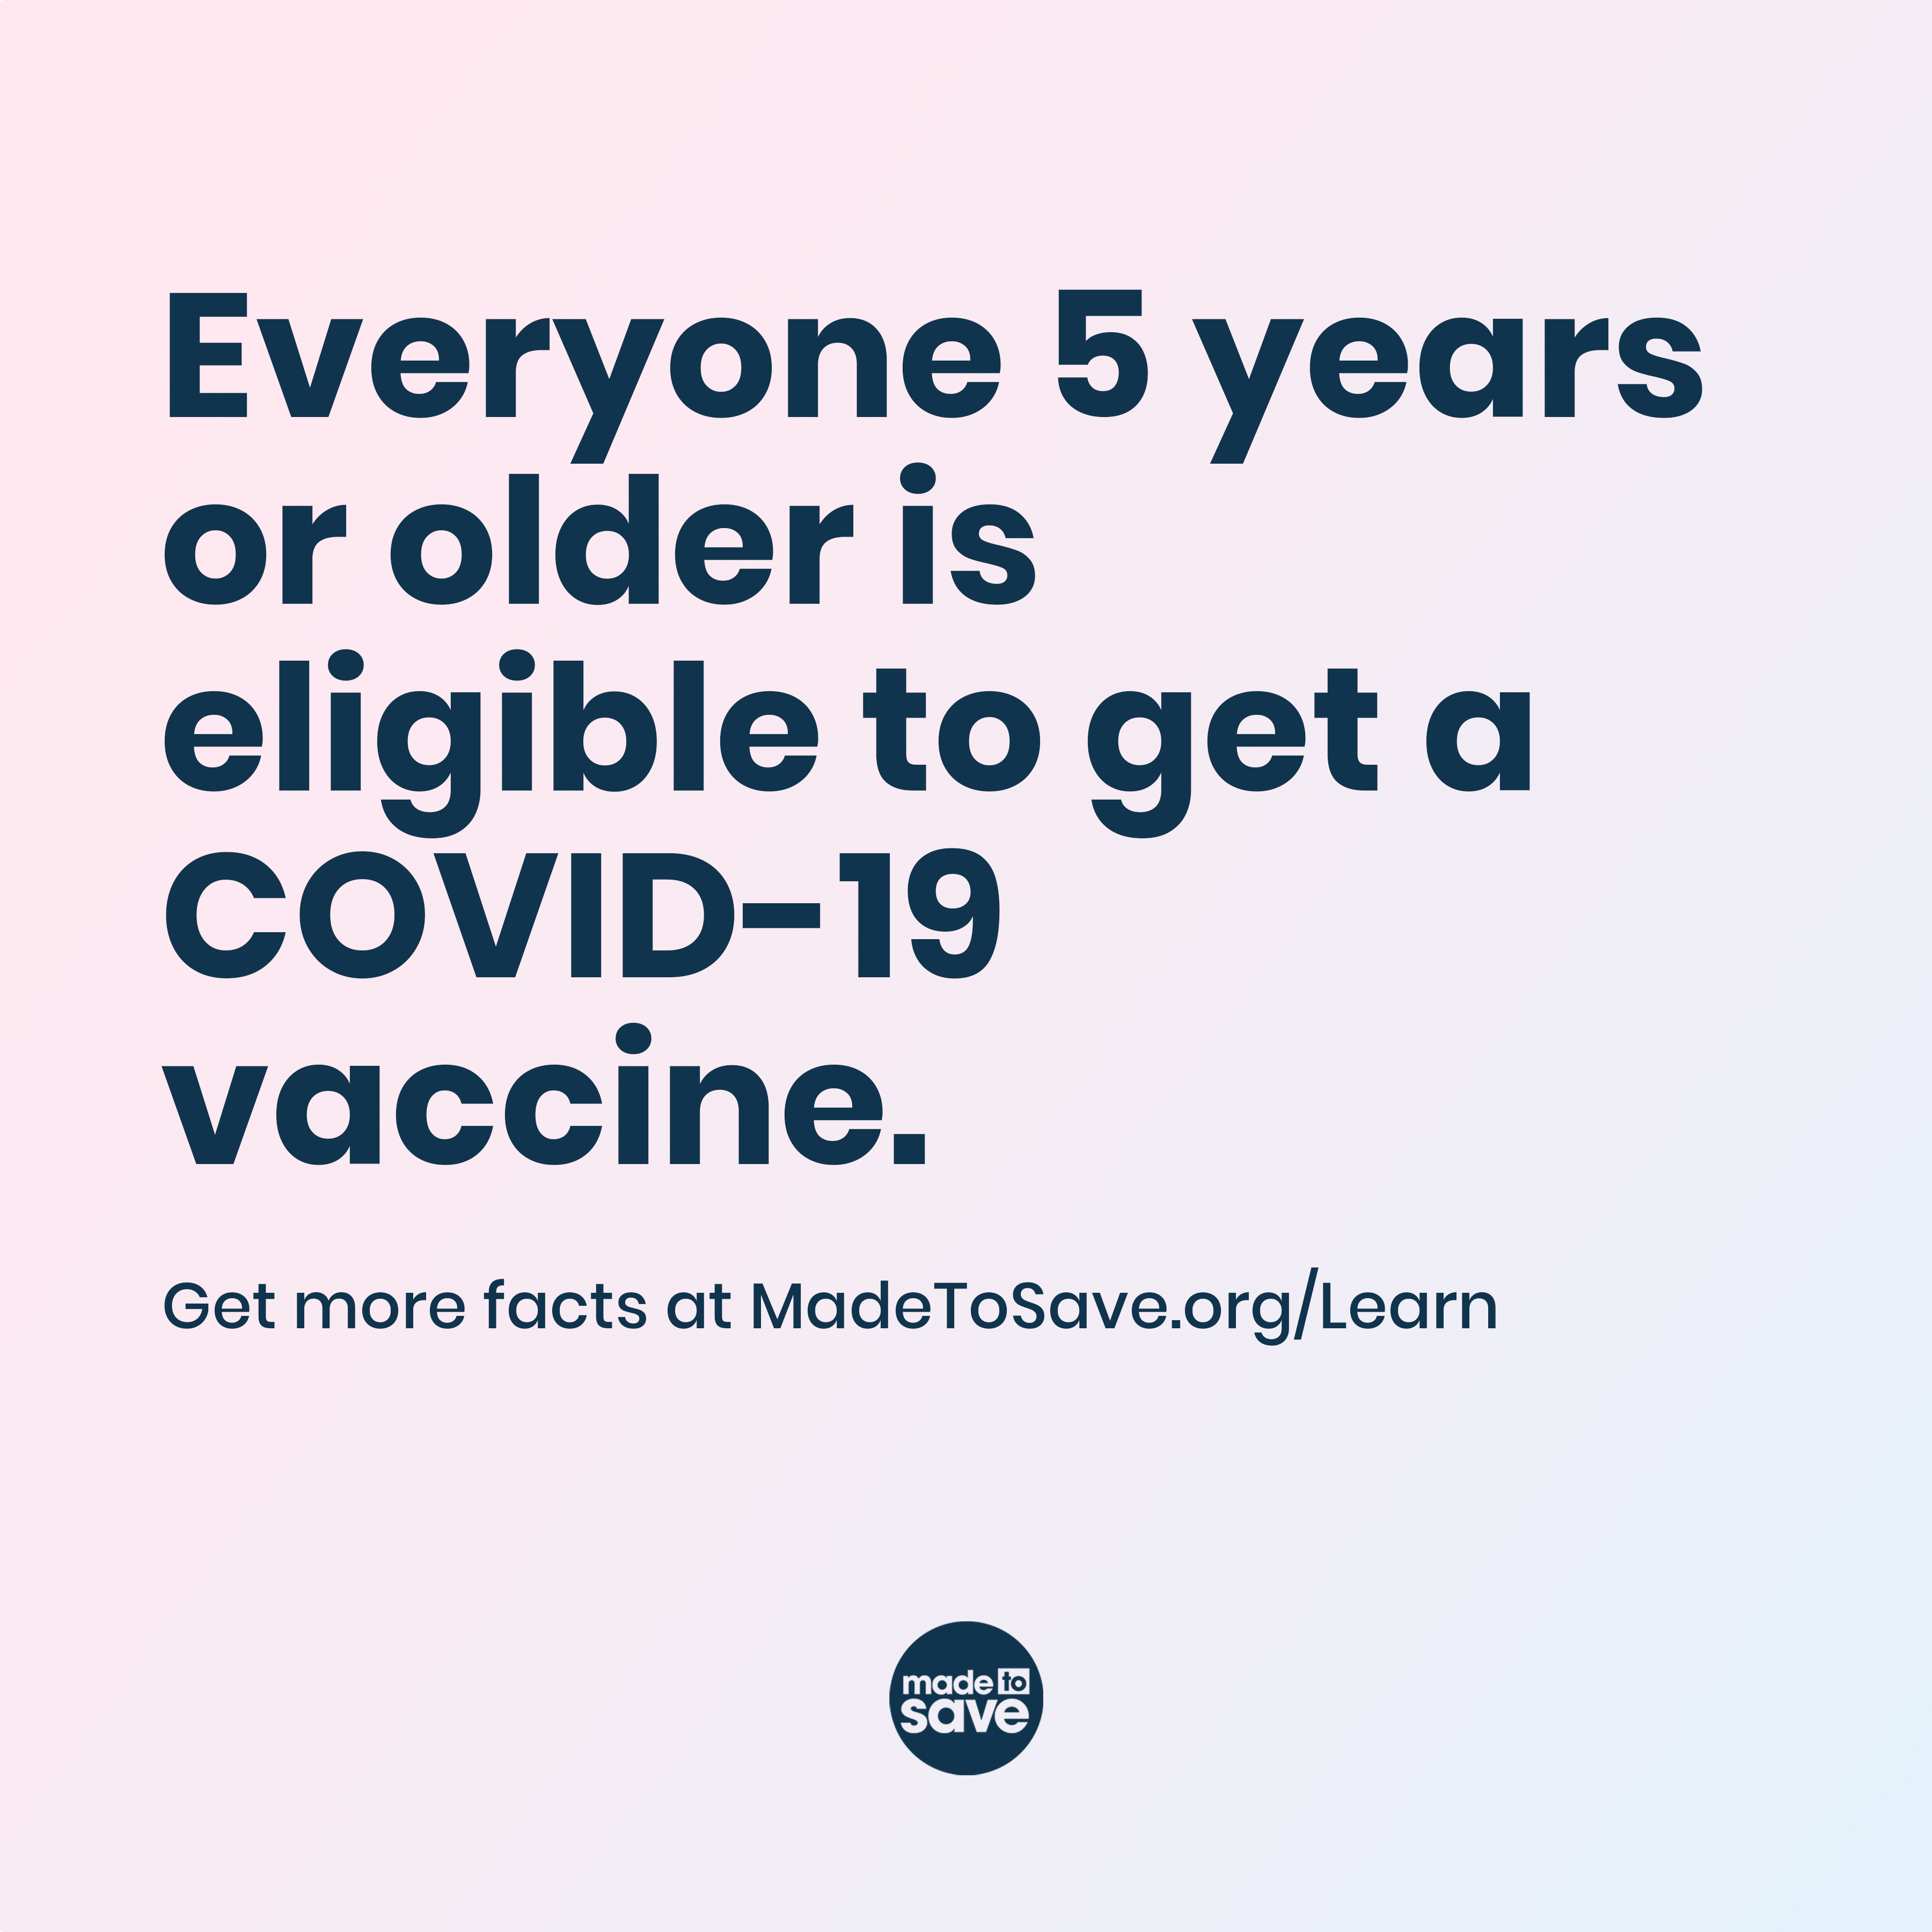 Graphic with pink and blue background. In blue text it reads, "Everyone 5 years or older is eligible to get a COVID-19 vaccine. Get more facts at MadetoSave.org/Learn. The Made to Save logo is centered in dark blue.